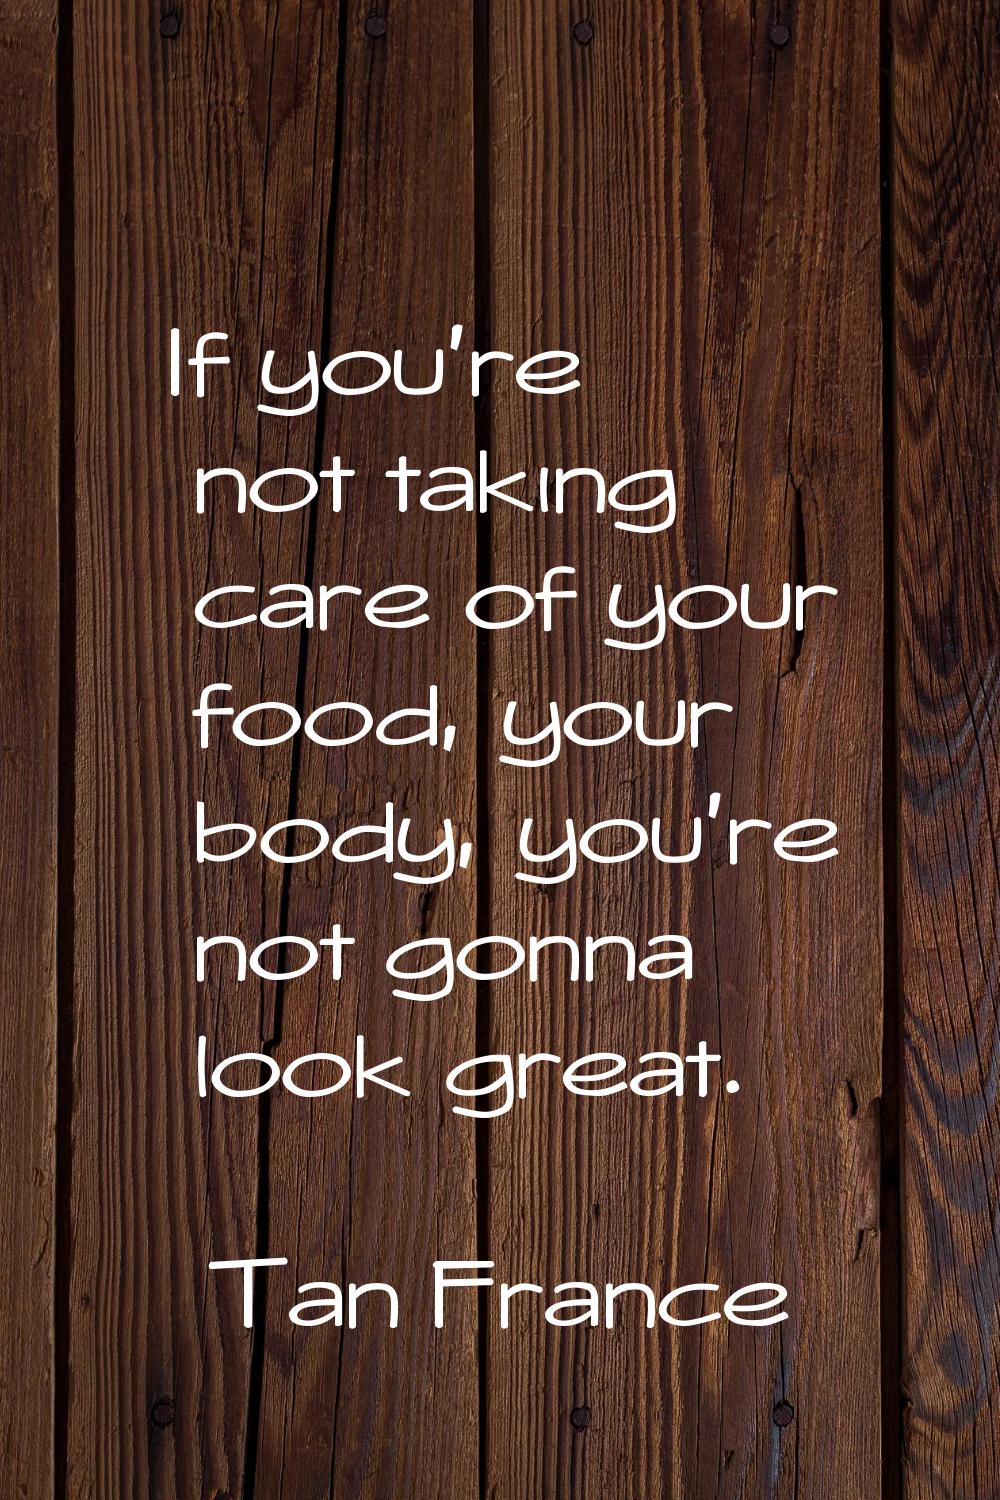 If you're not taking care of your food, your body, you're not gonna look great.